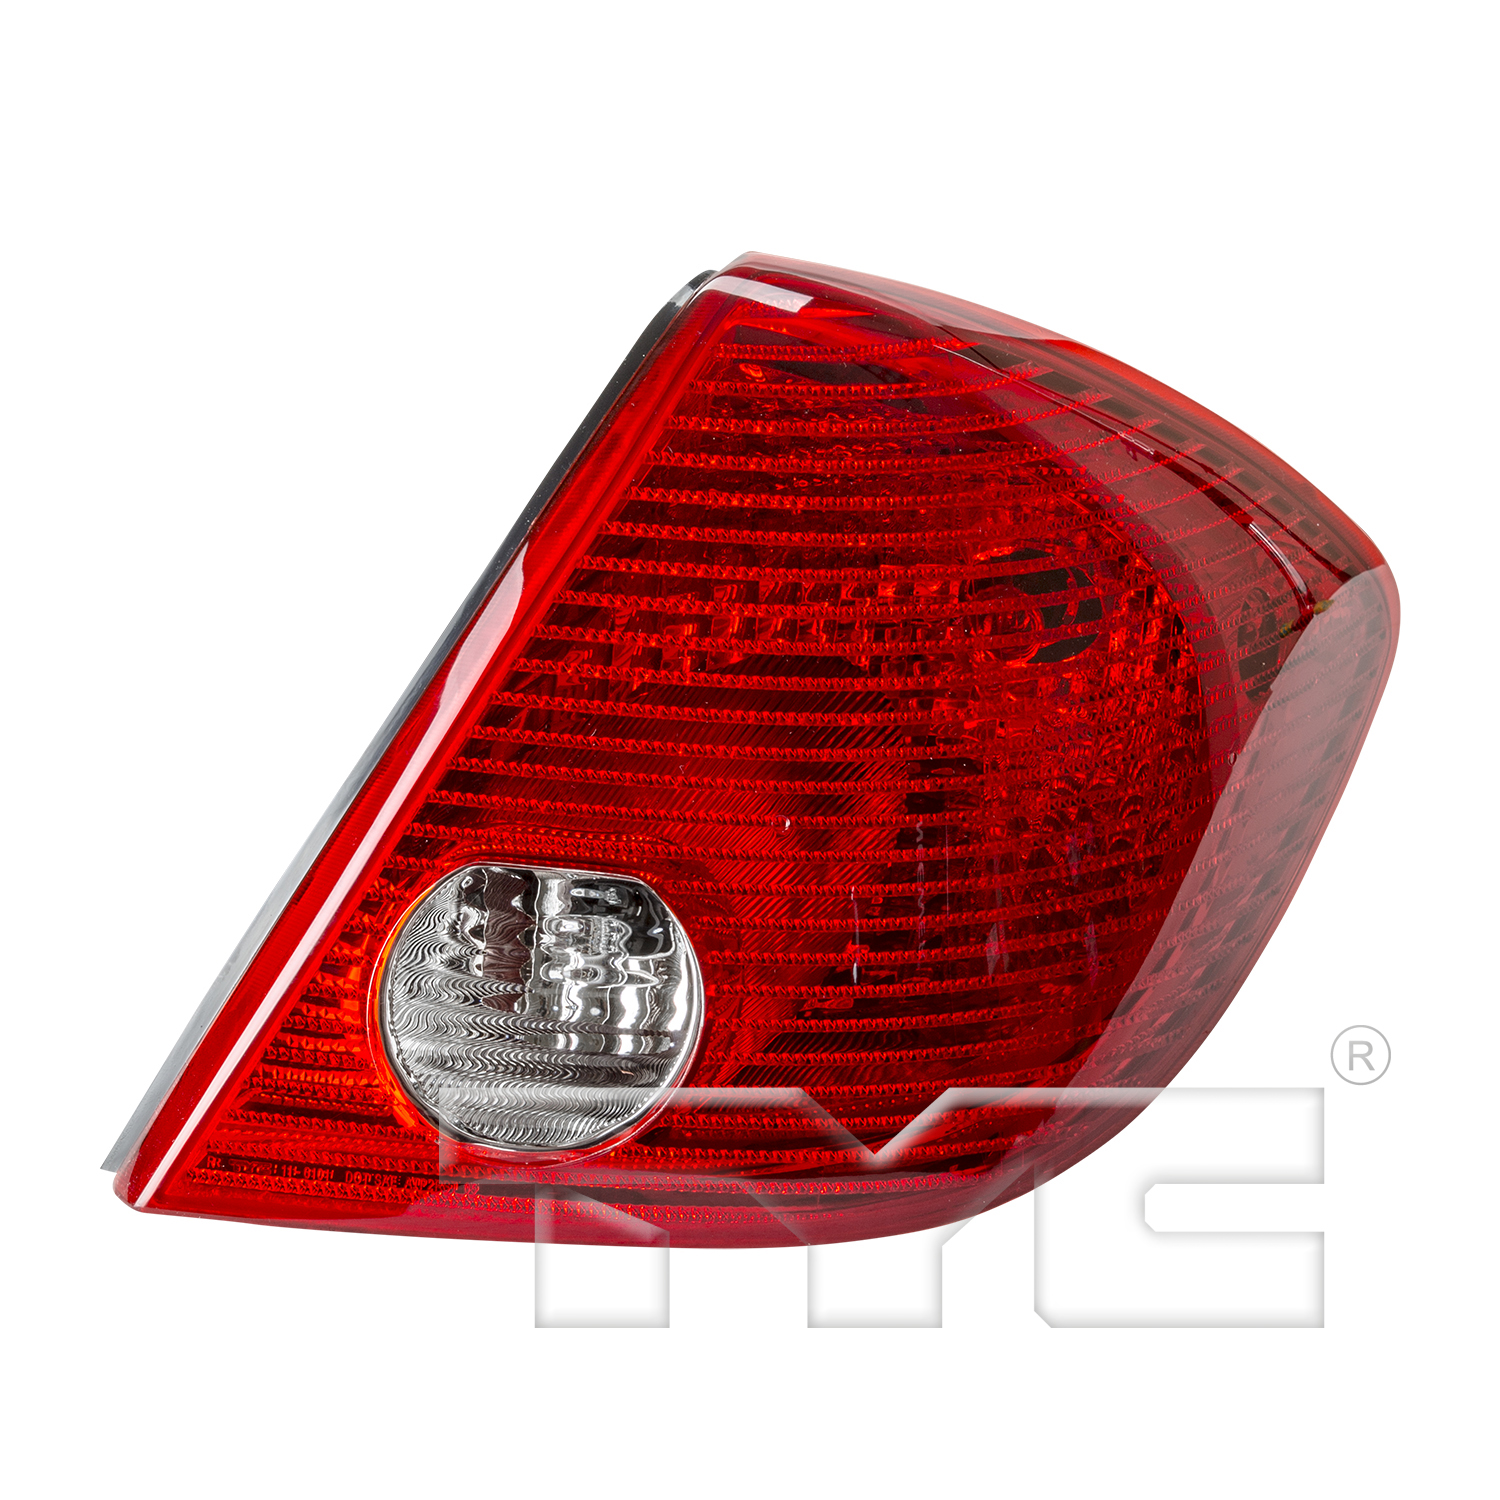 Aftermarket TAILLIGHTS for PONTIAC - G6, G6,05-10,RT Taillamp assy